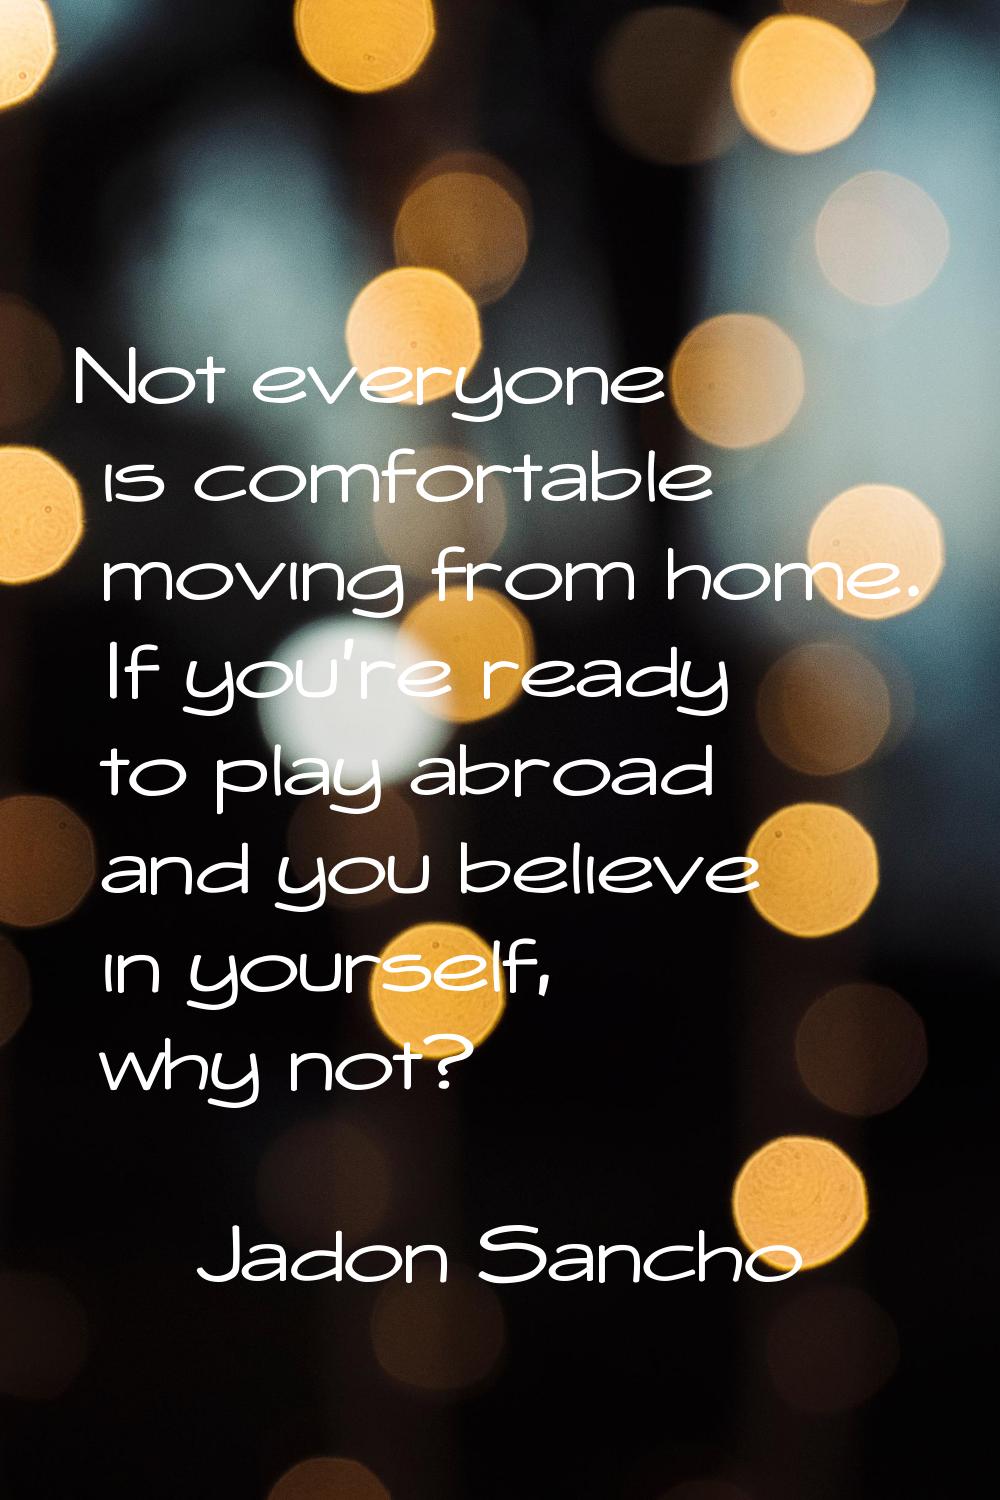 Not everyone is comfortable moving from home. If you're ready to play abroad and you believe in you